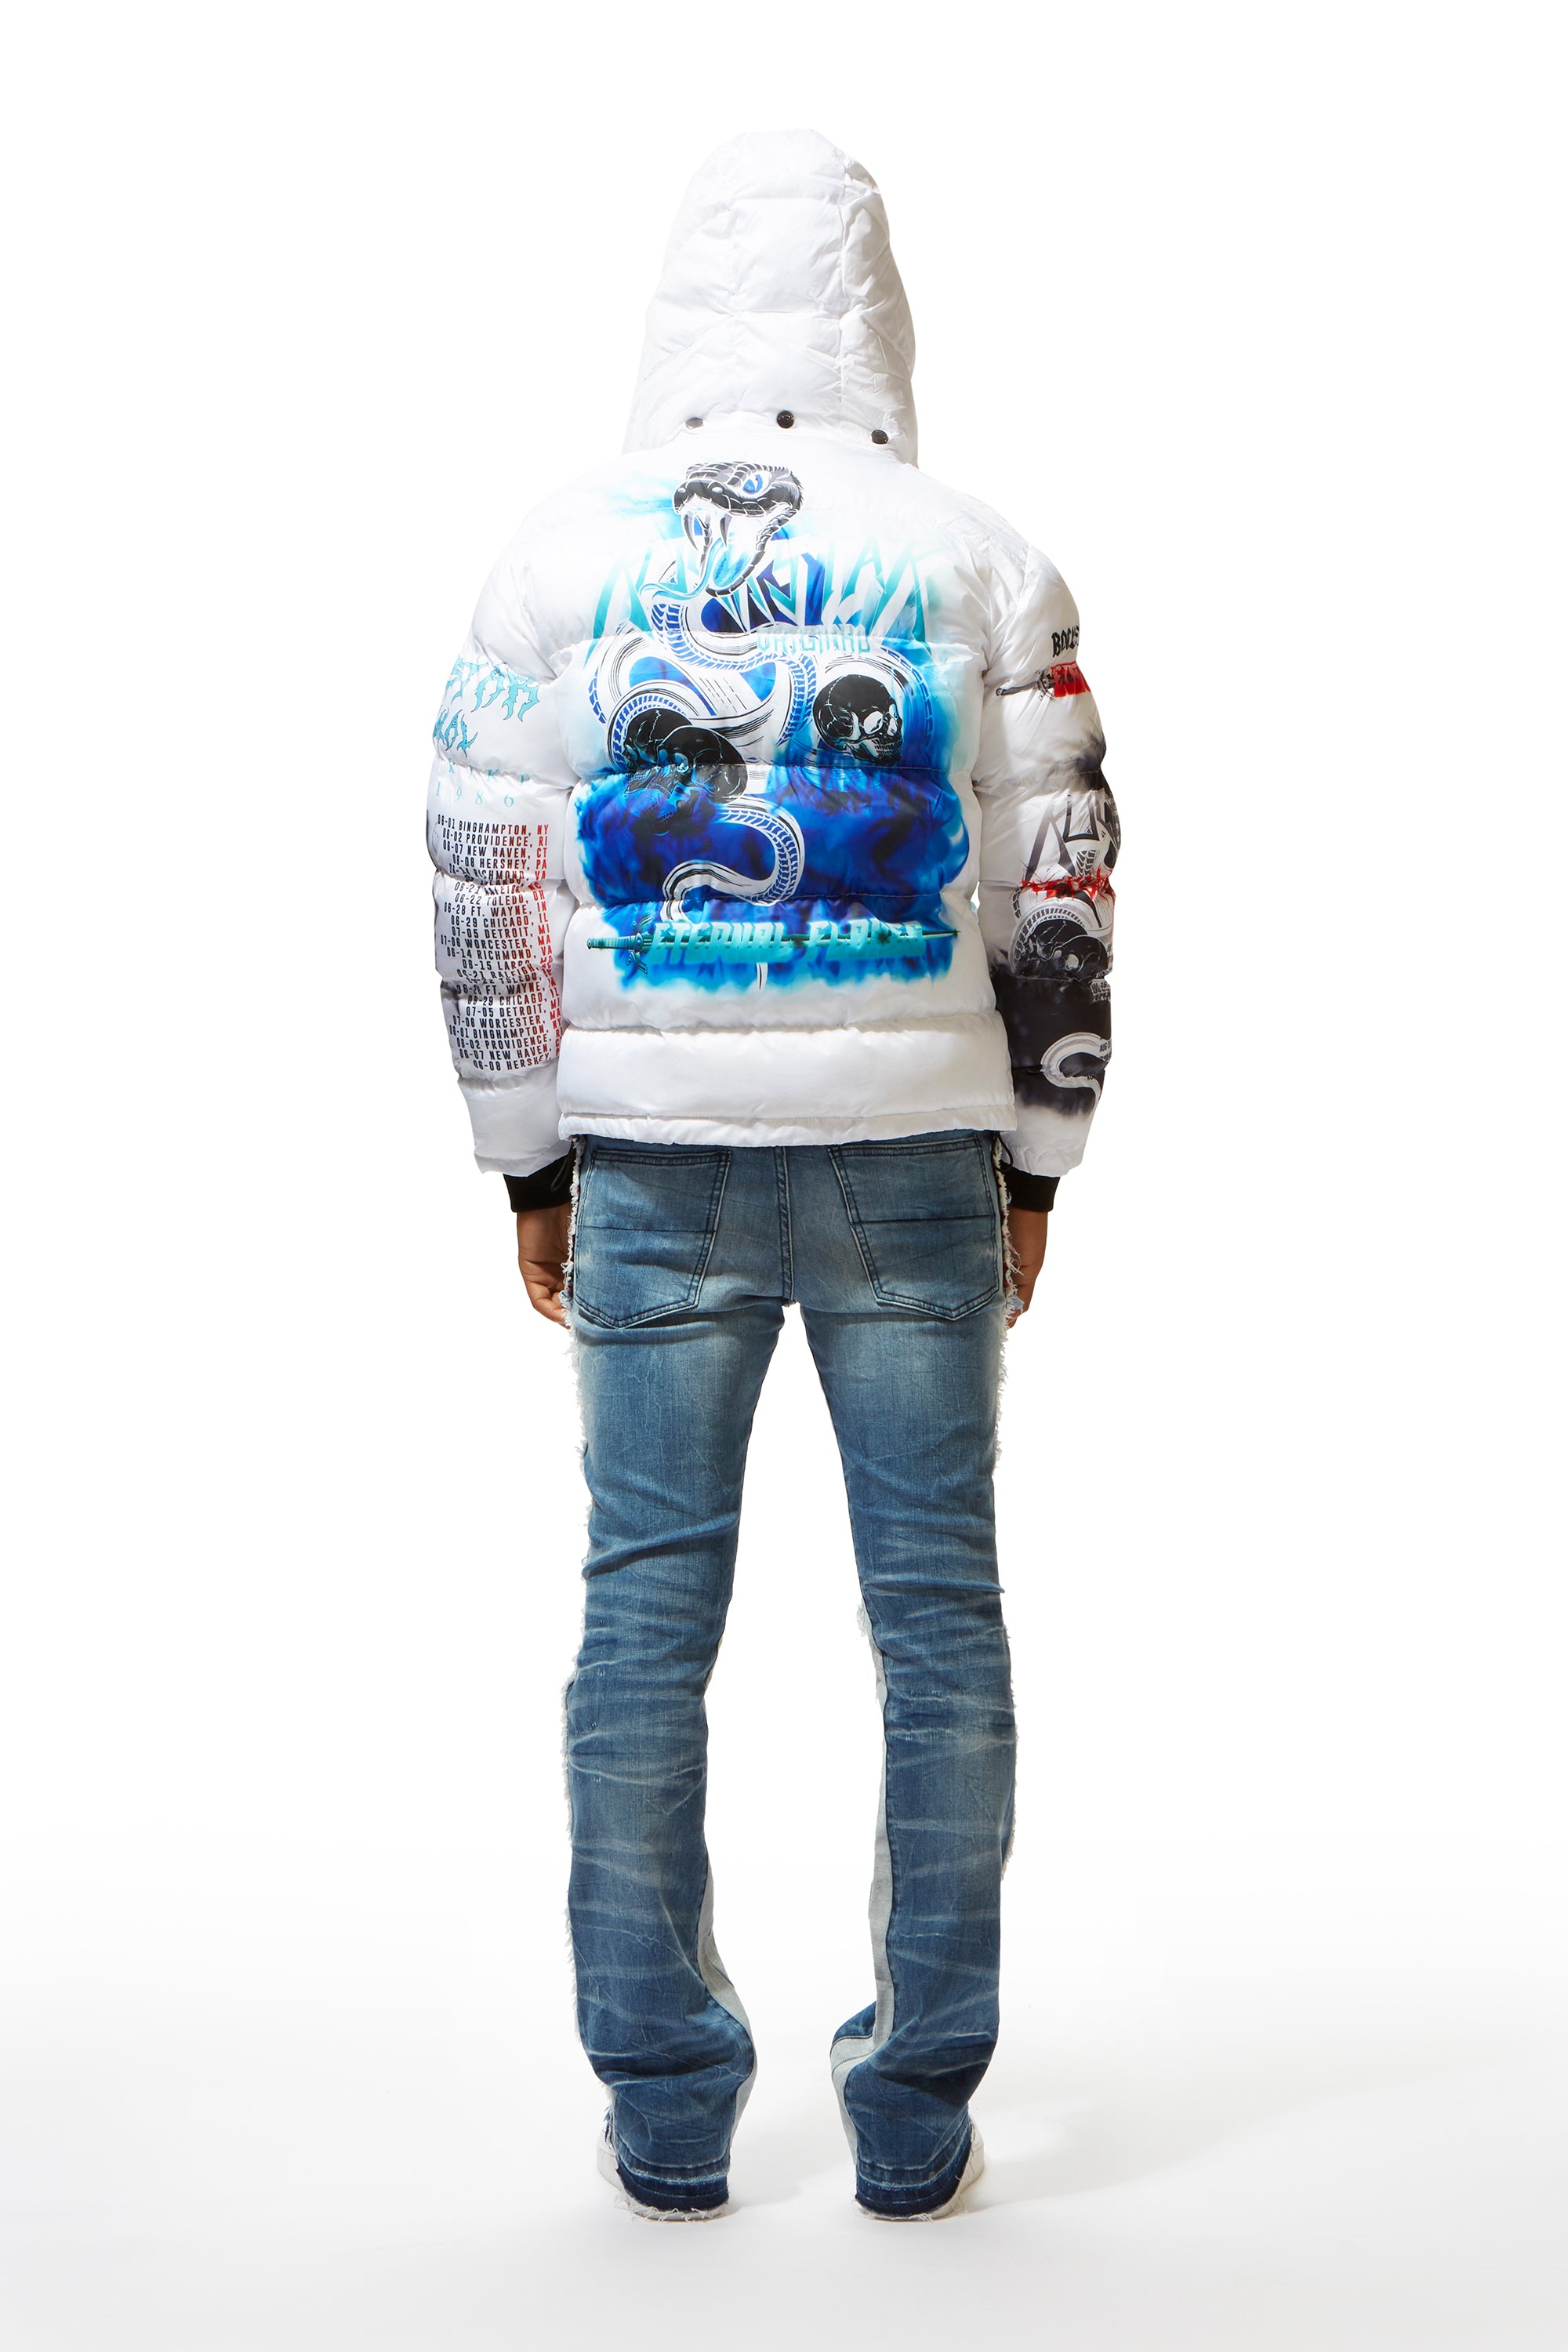 Here is a look at a new puffer jacket, crewneck sweater, graphic